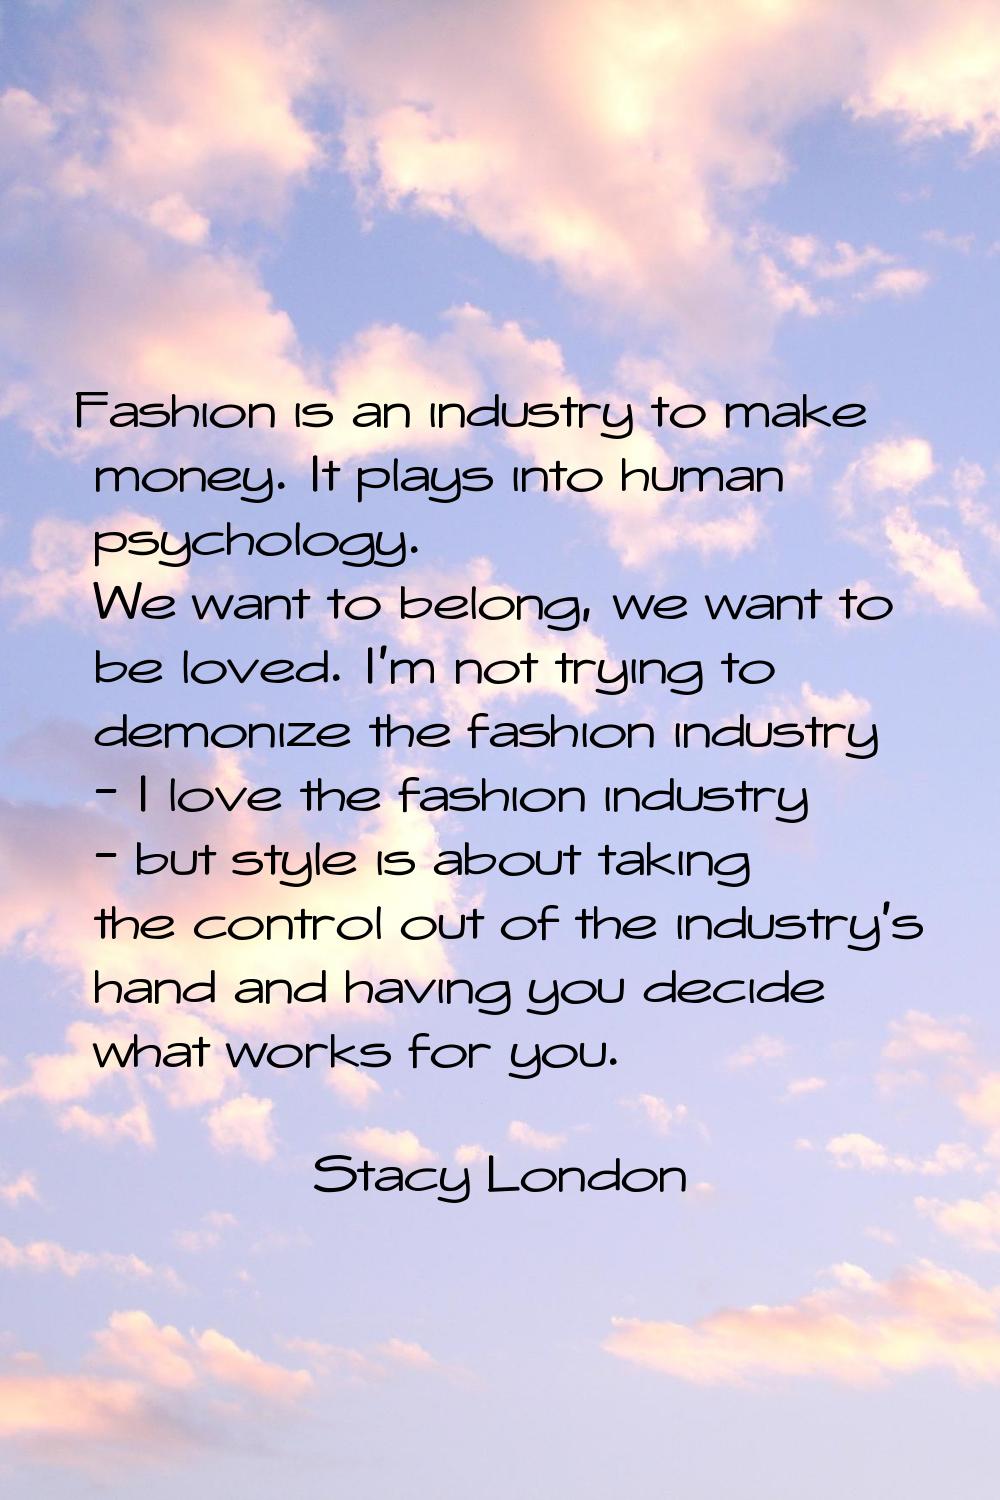 Fashion is an industry to make money. It plays into human psychology. We want to belong, we want to